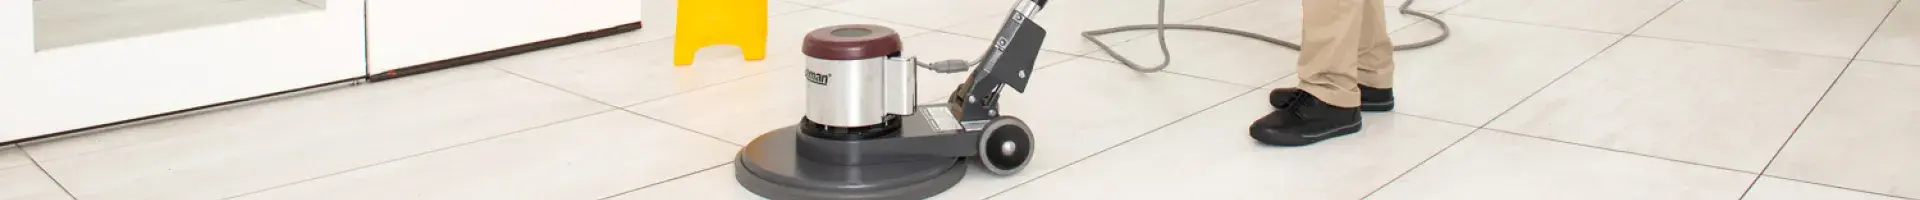 A Stratus Franchisee with a Hard Floor Cleaning Machine in an Office Building.